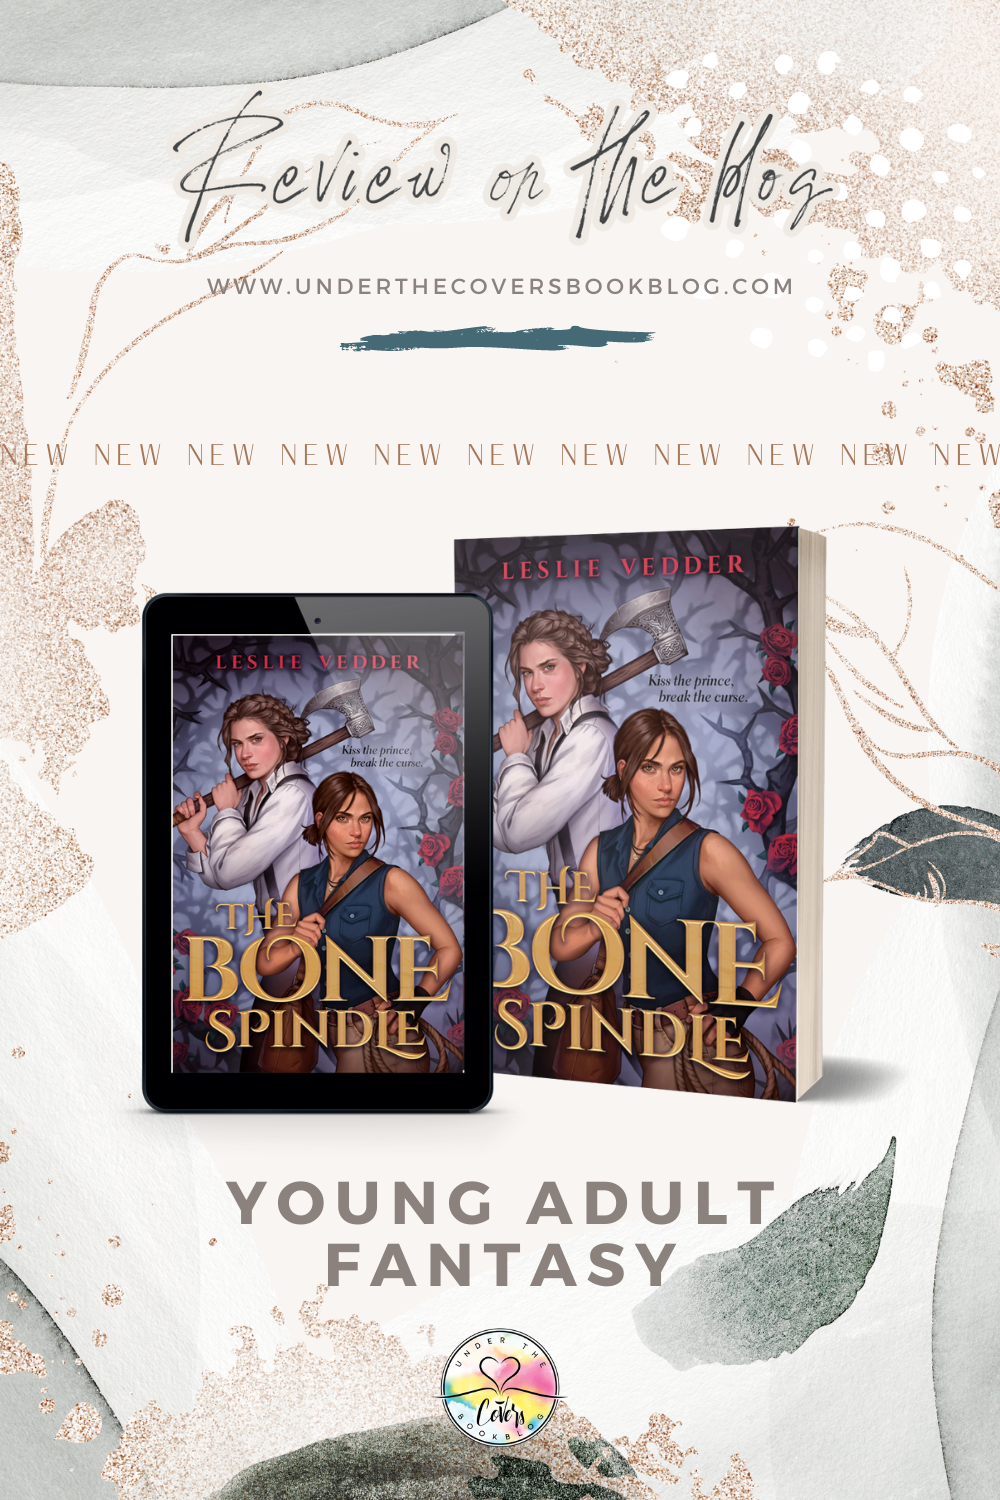 ARC Review: The Bone Spindle by Leslie Vedder